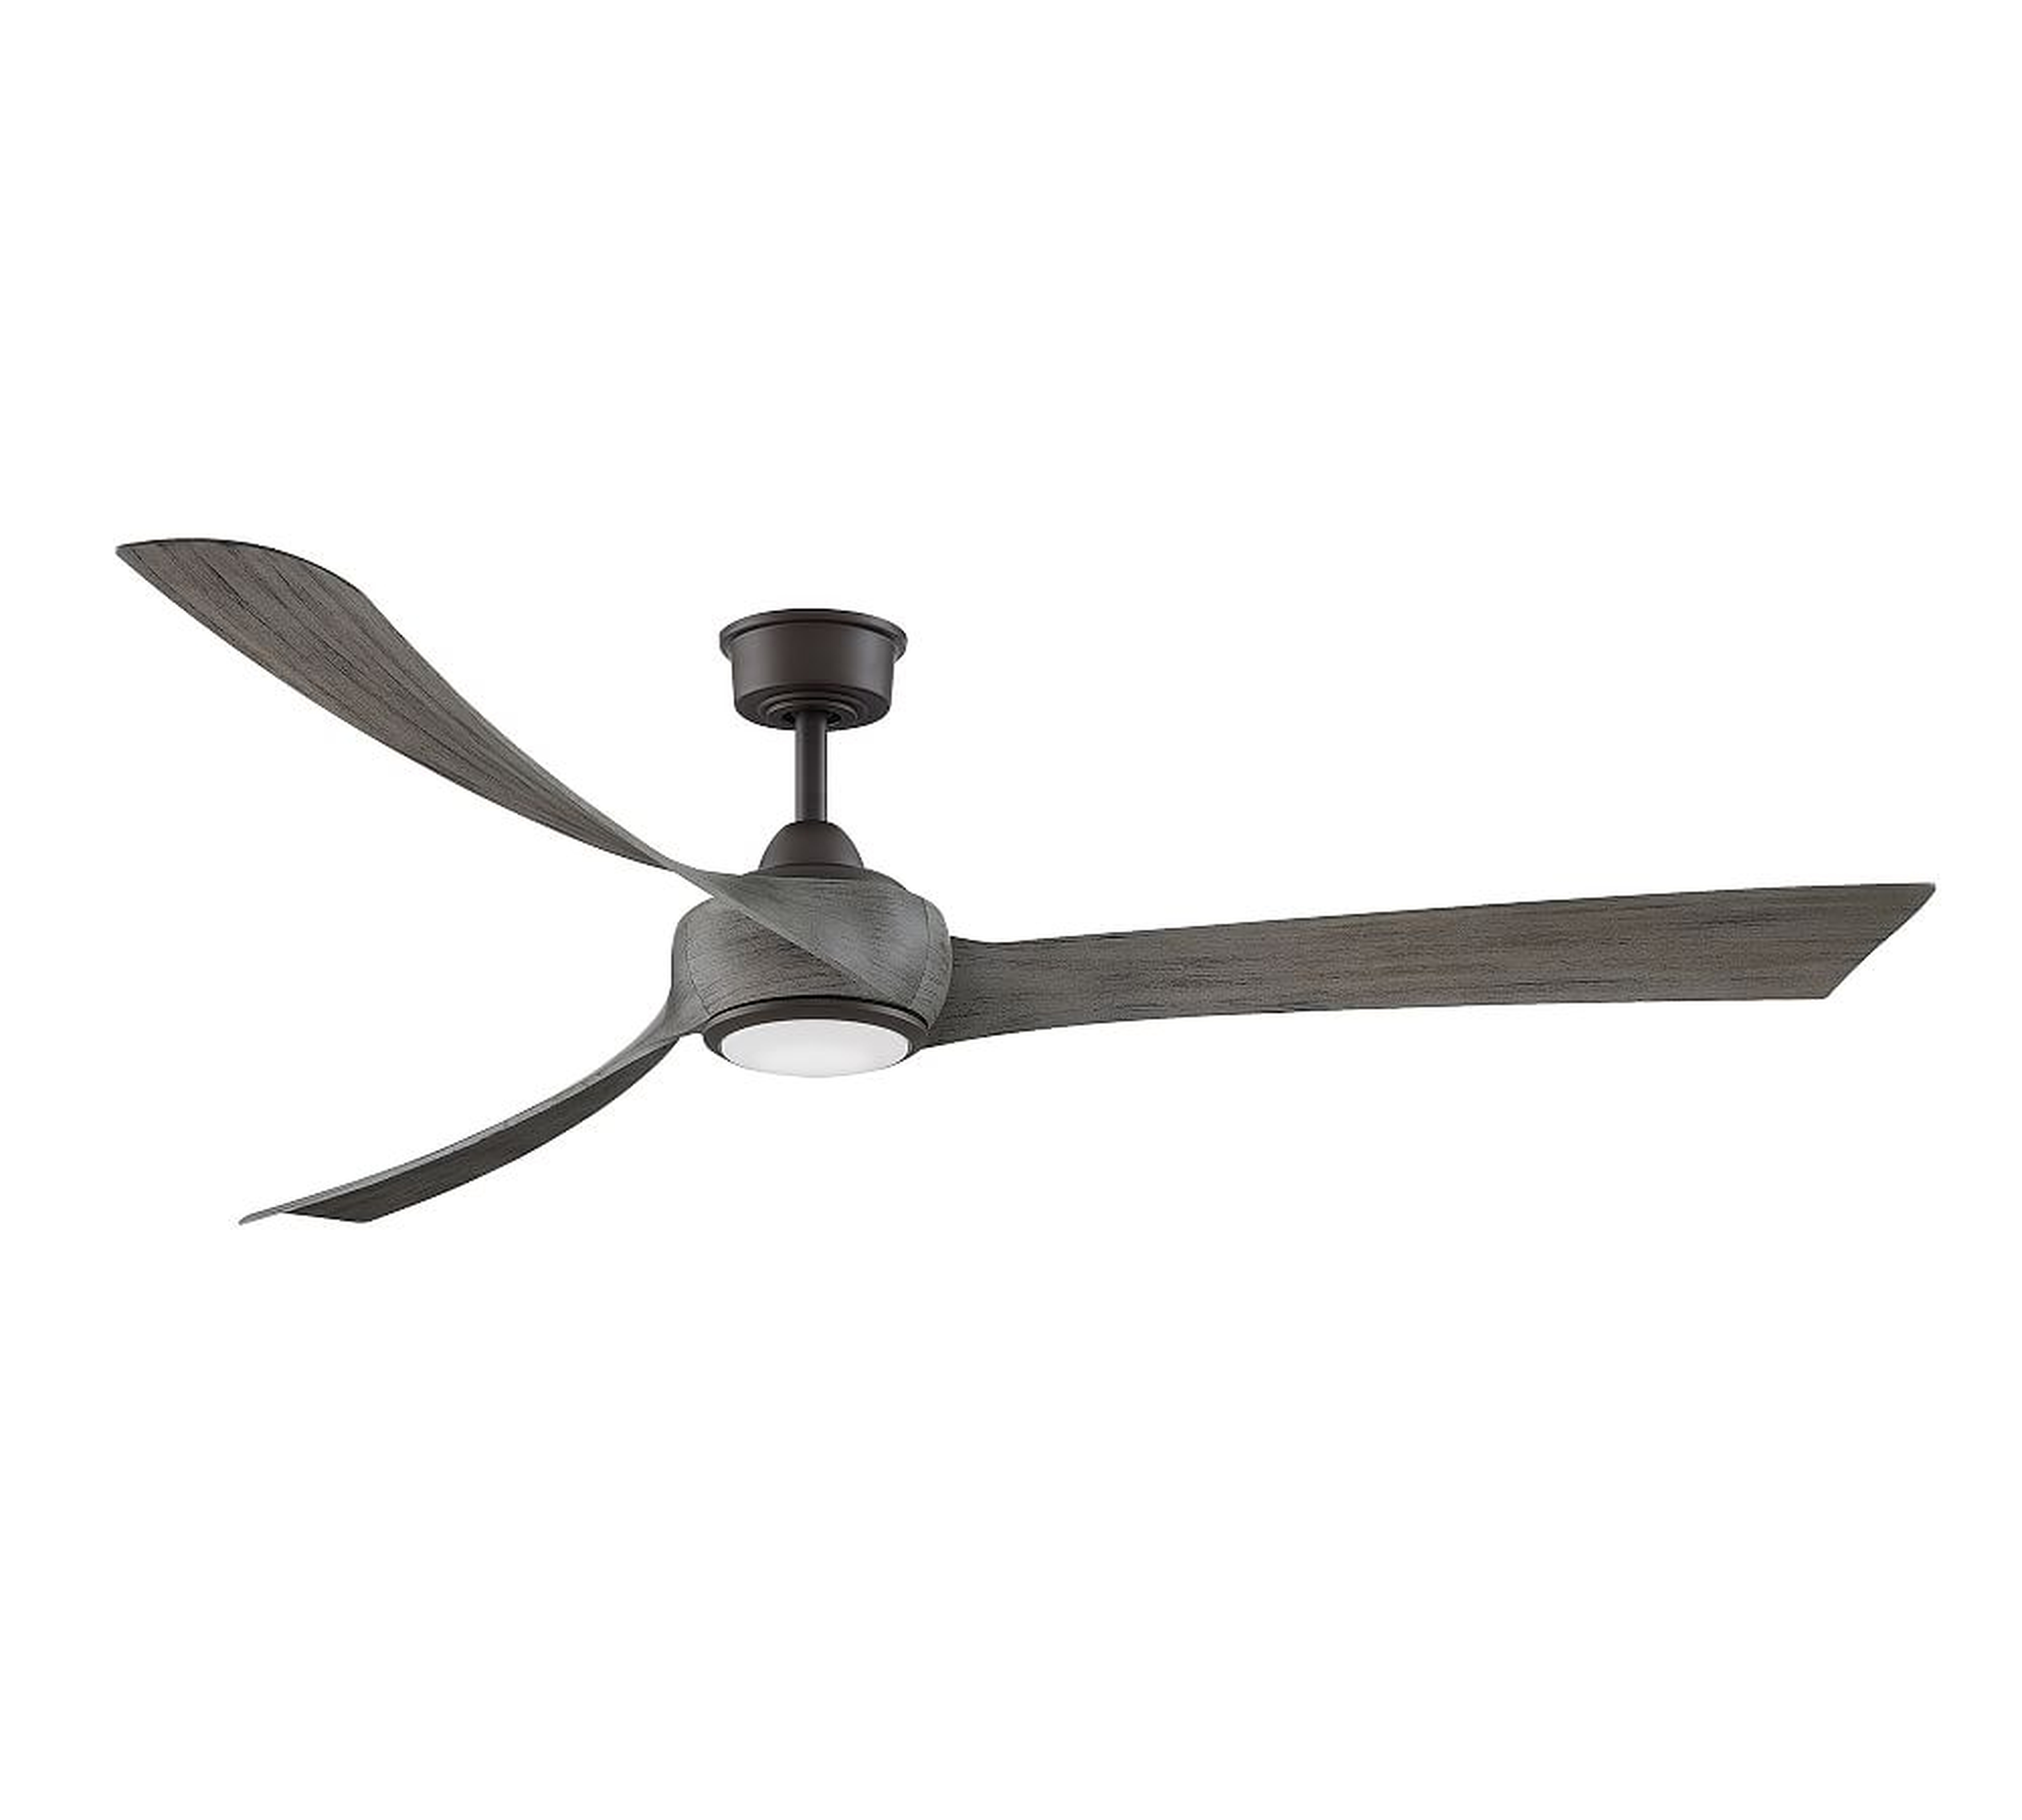 Wrap 72" Indoor/Outdoor Ceiling Fan With Led Light Kit, Matte Greige/Weathered Wood Blades - Pottery Barn